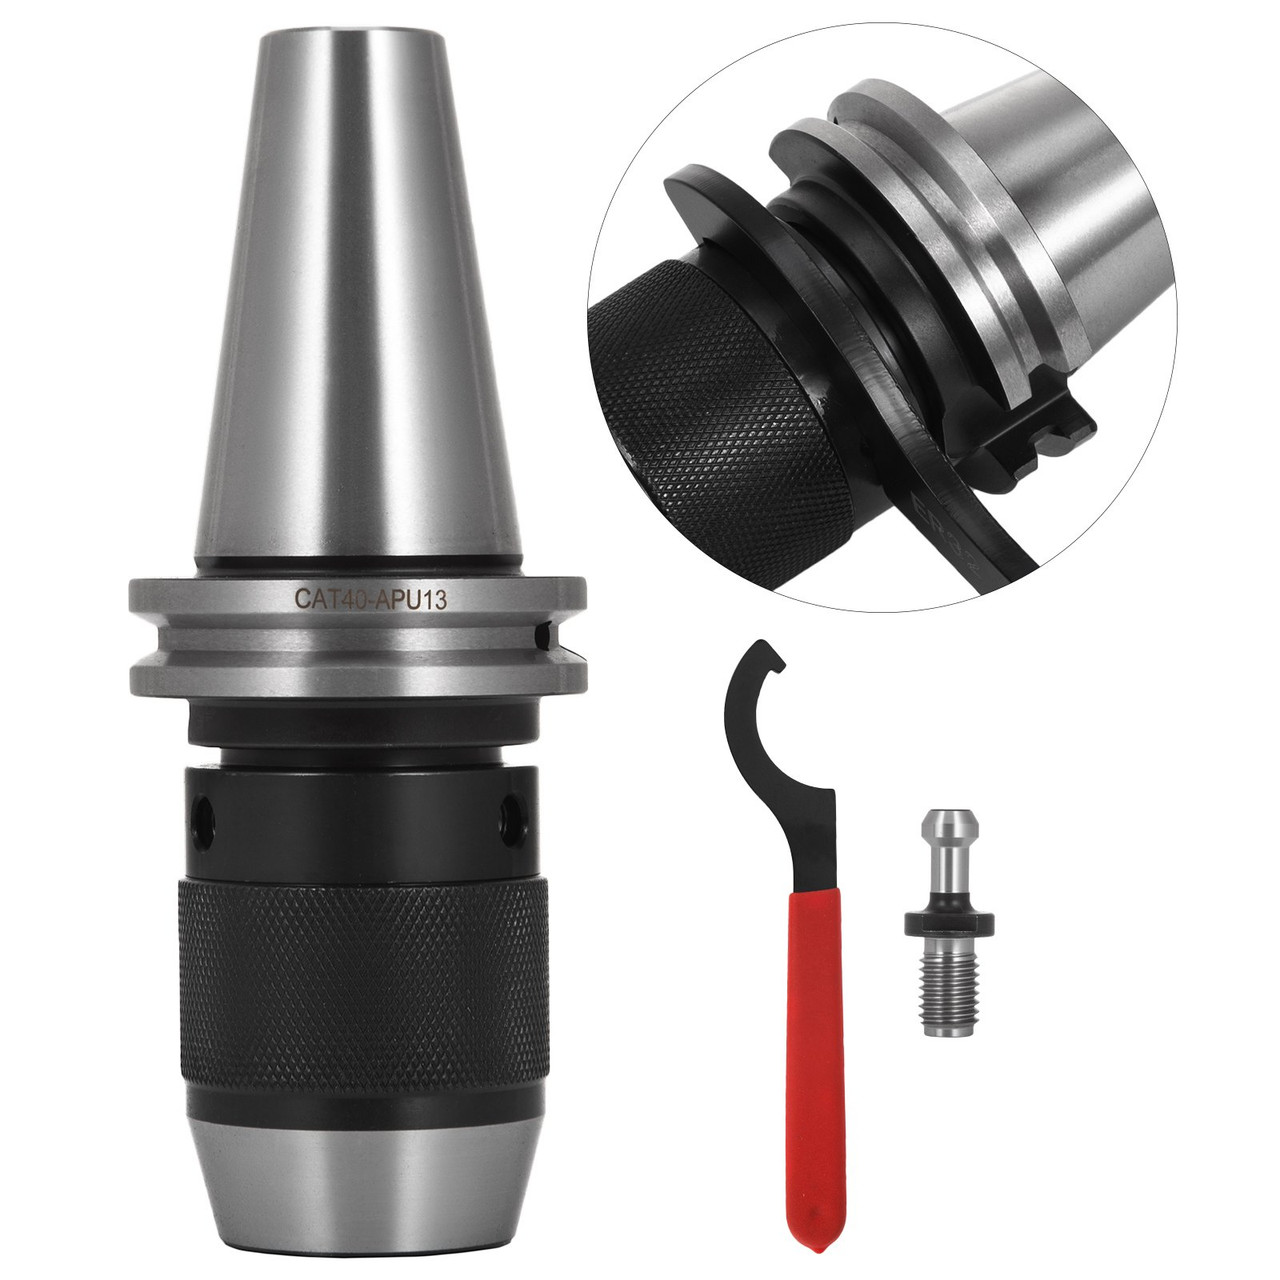 Integrated CAT40 Collet Chuck Keyless Drill Chuck 1/2 inch for CAT40 CNC Engraving Machine & Milling Lathe Tool (CAT40)